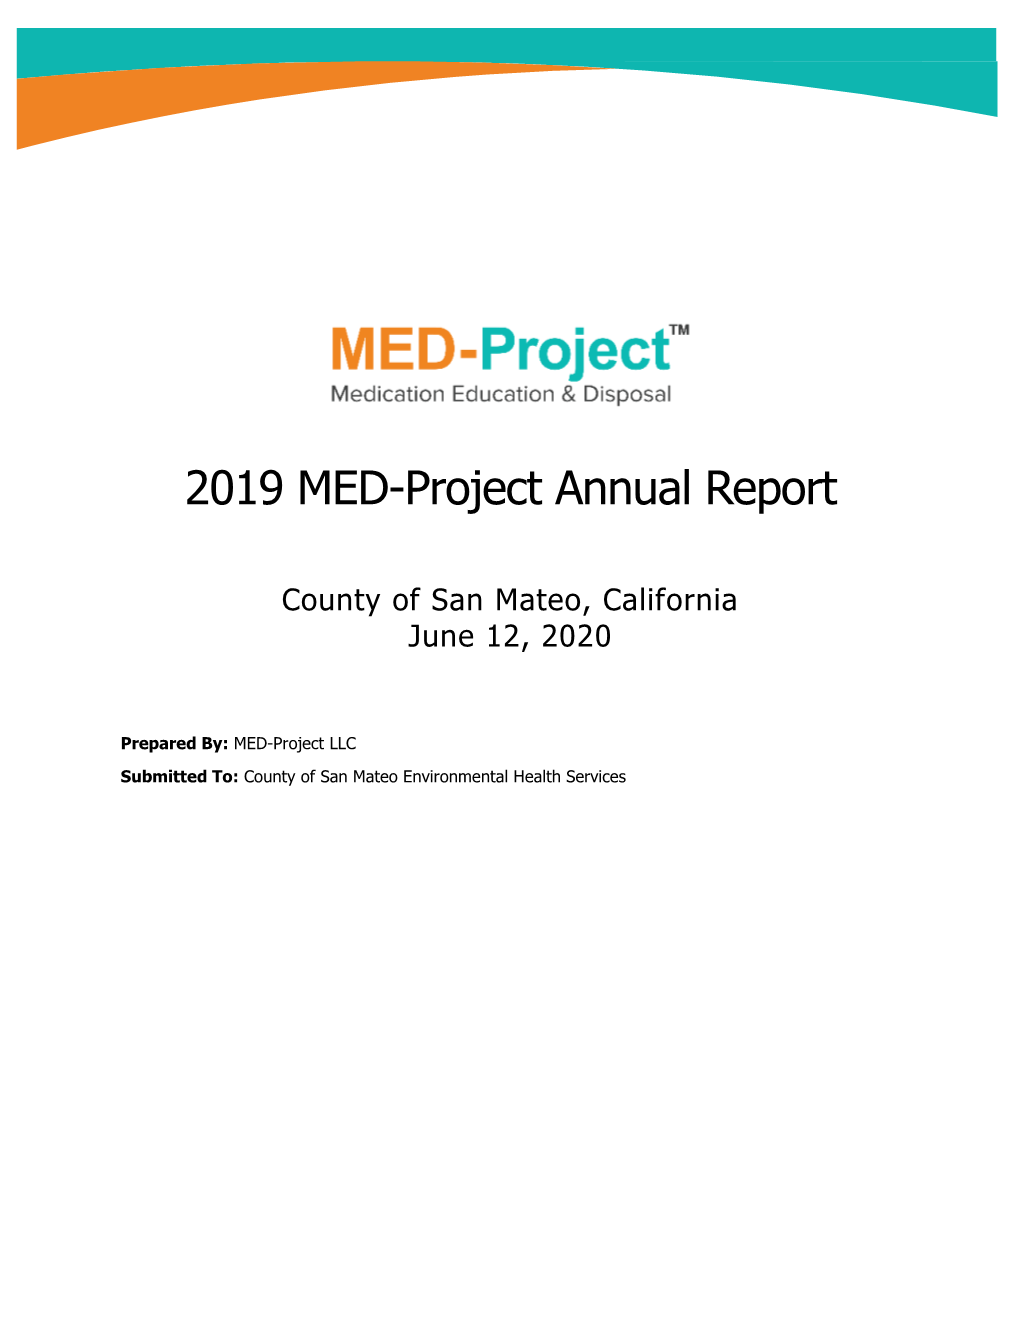 (NEW) 2019 MED-Project Annual Report